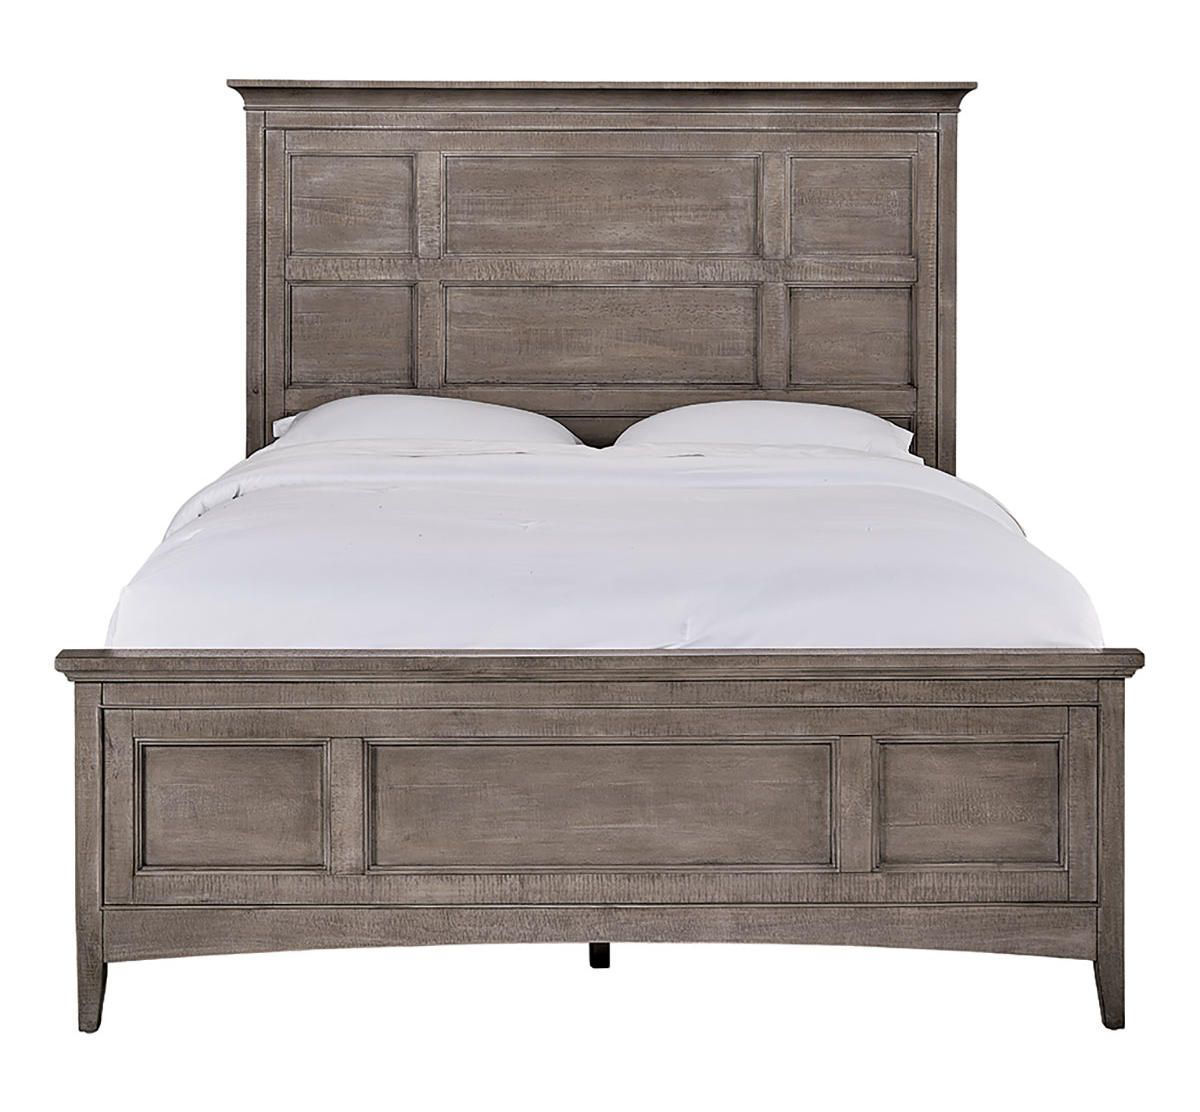 Keaton Complete King Bed Badcock Home Furniture More,Picture Frame On Wall Free